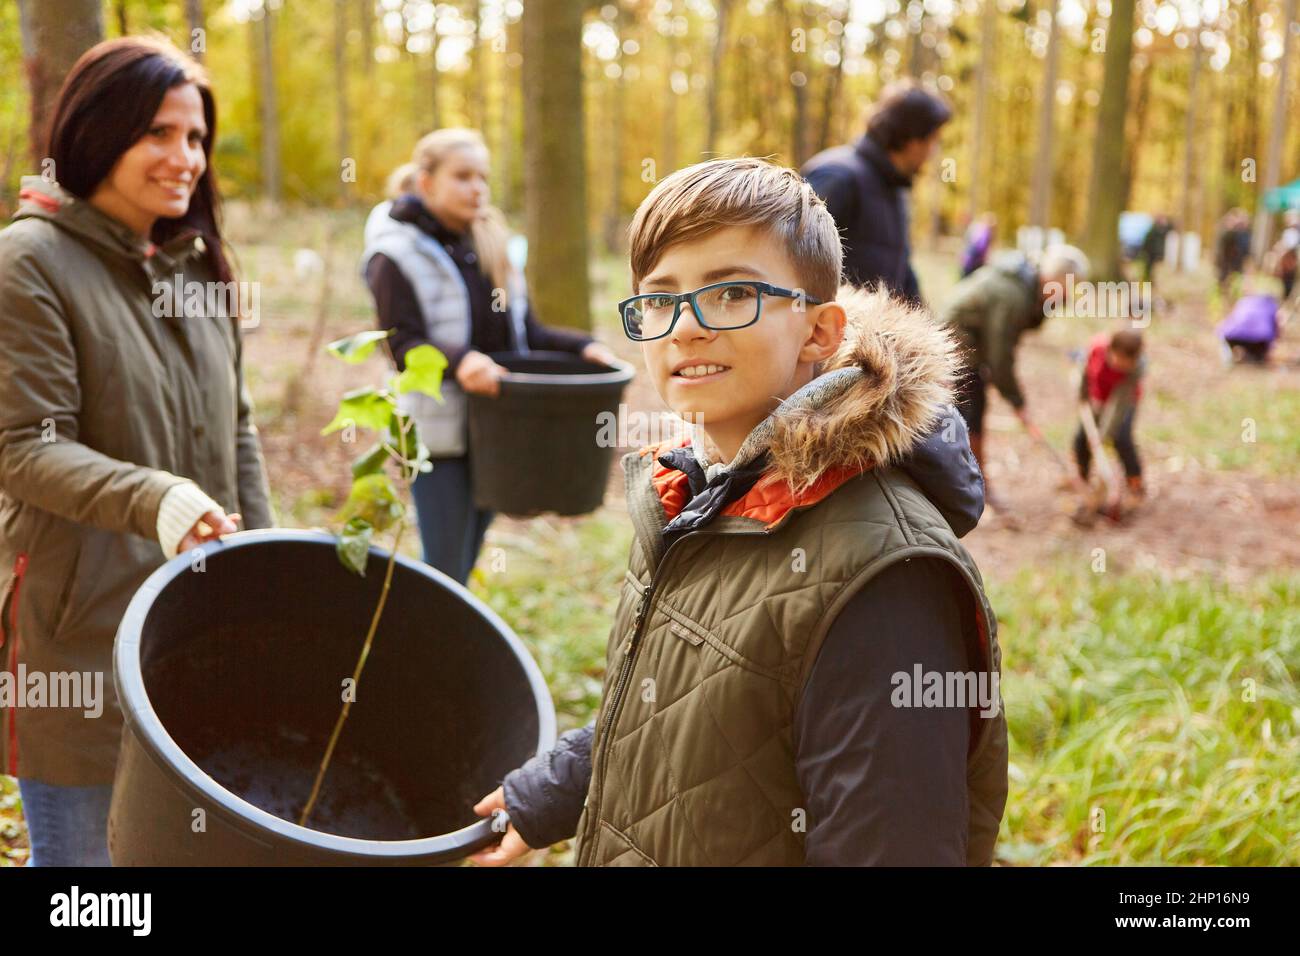 Little boy helps family plant a tree in the forest for sustainable reforestation Stock Photo